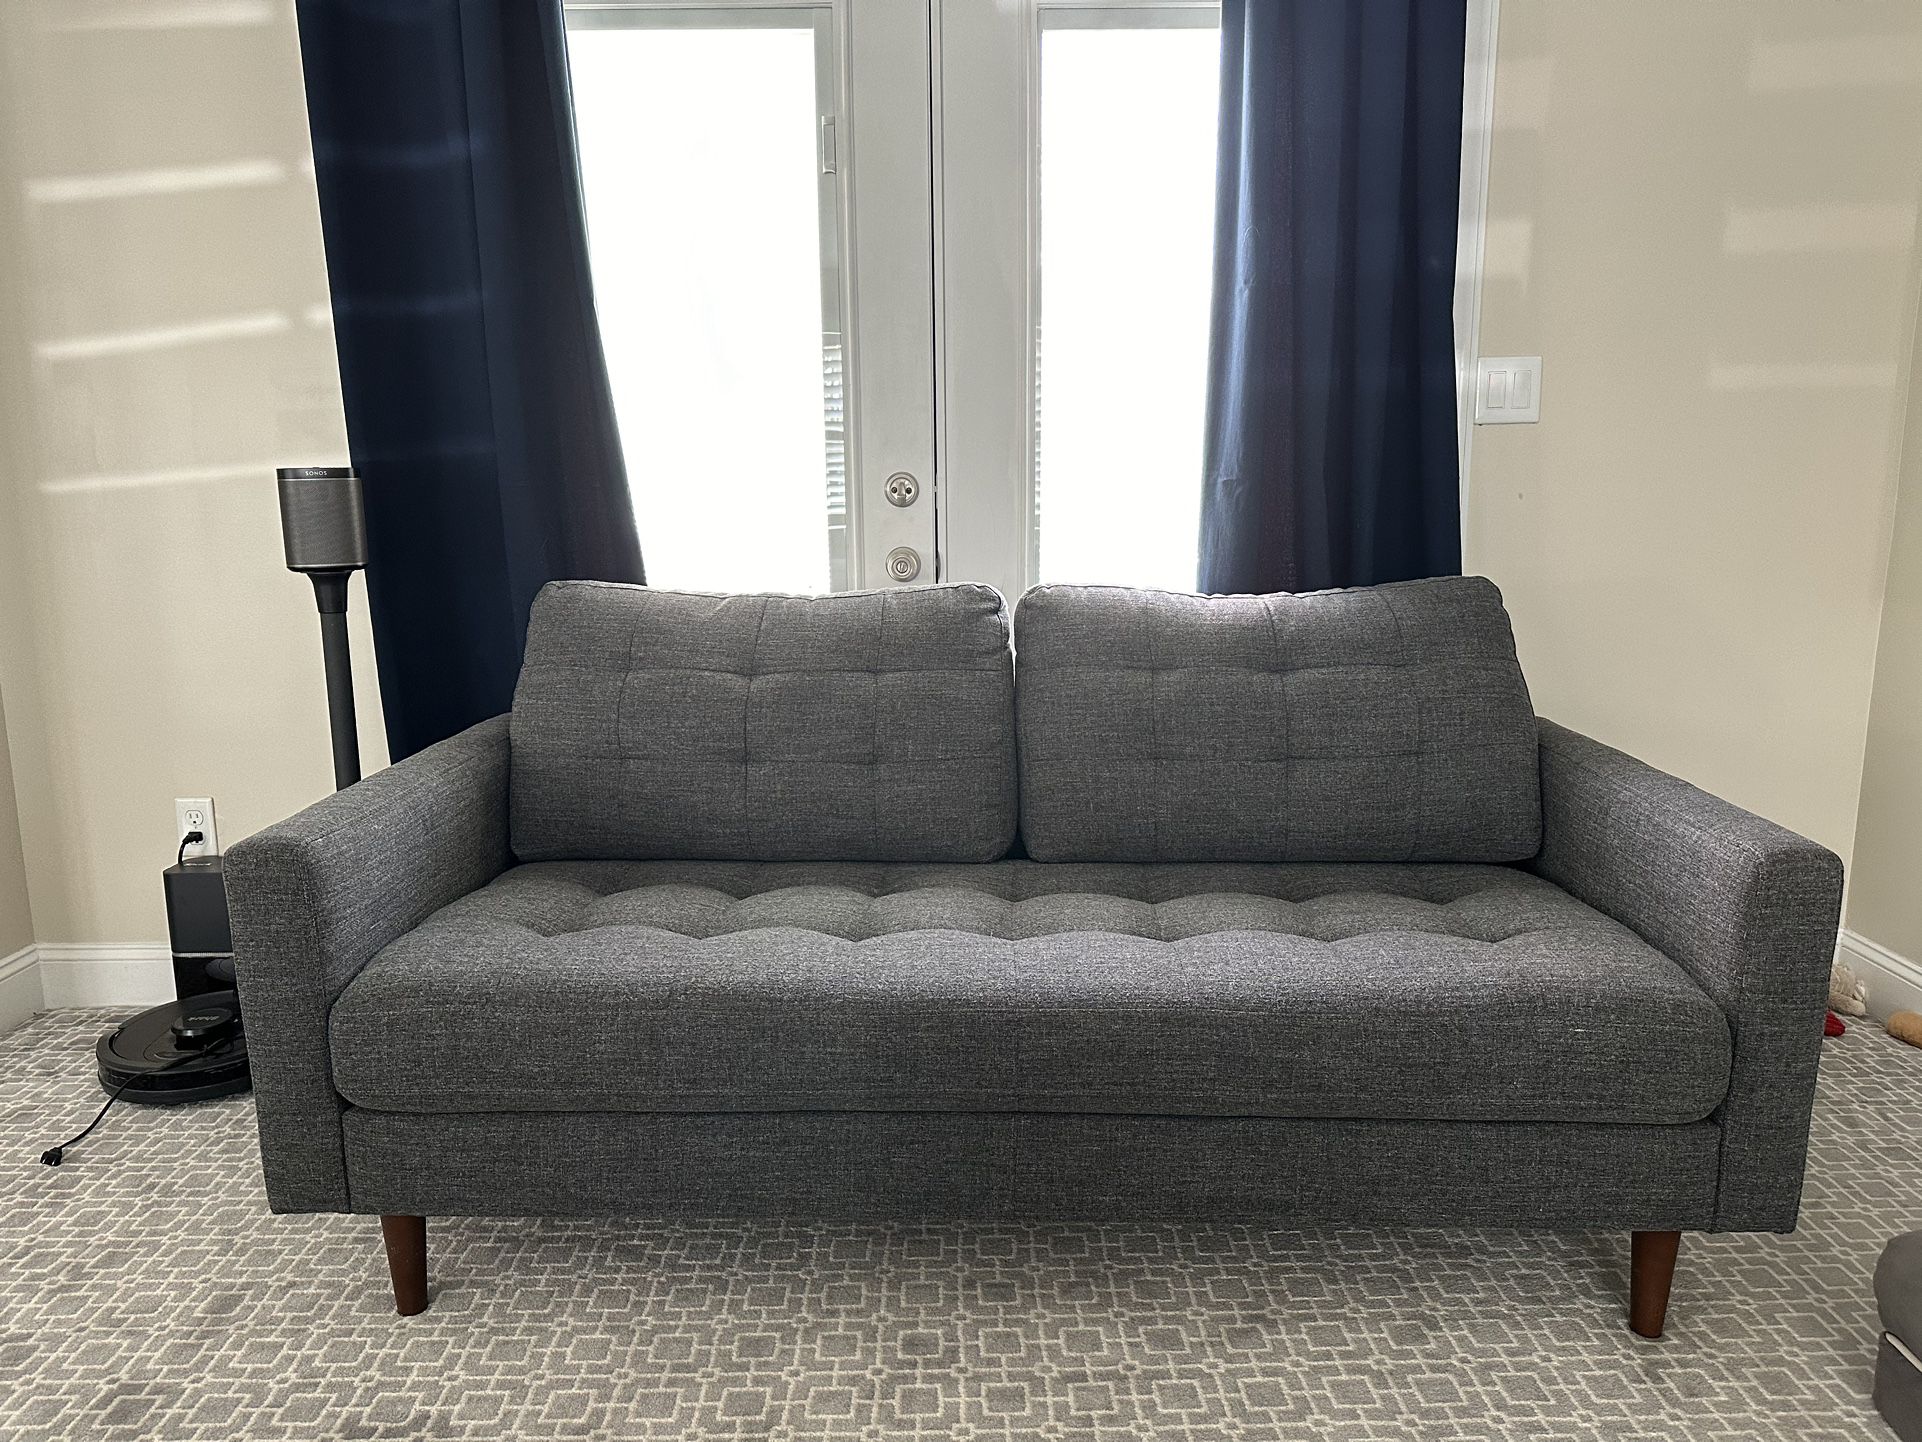 Small Sofa - $150 (must pick up)